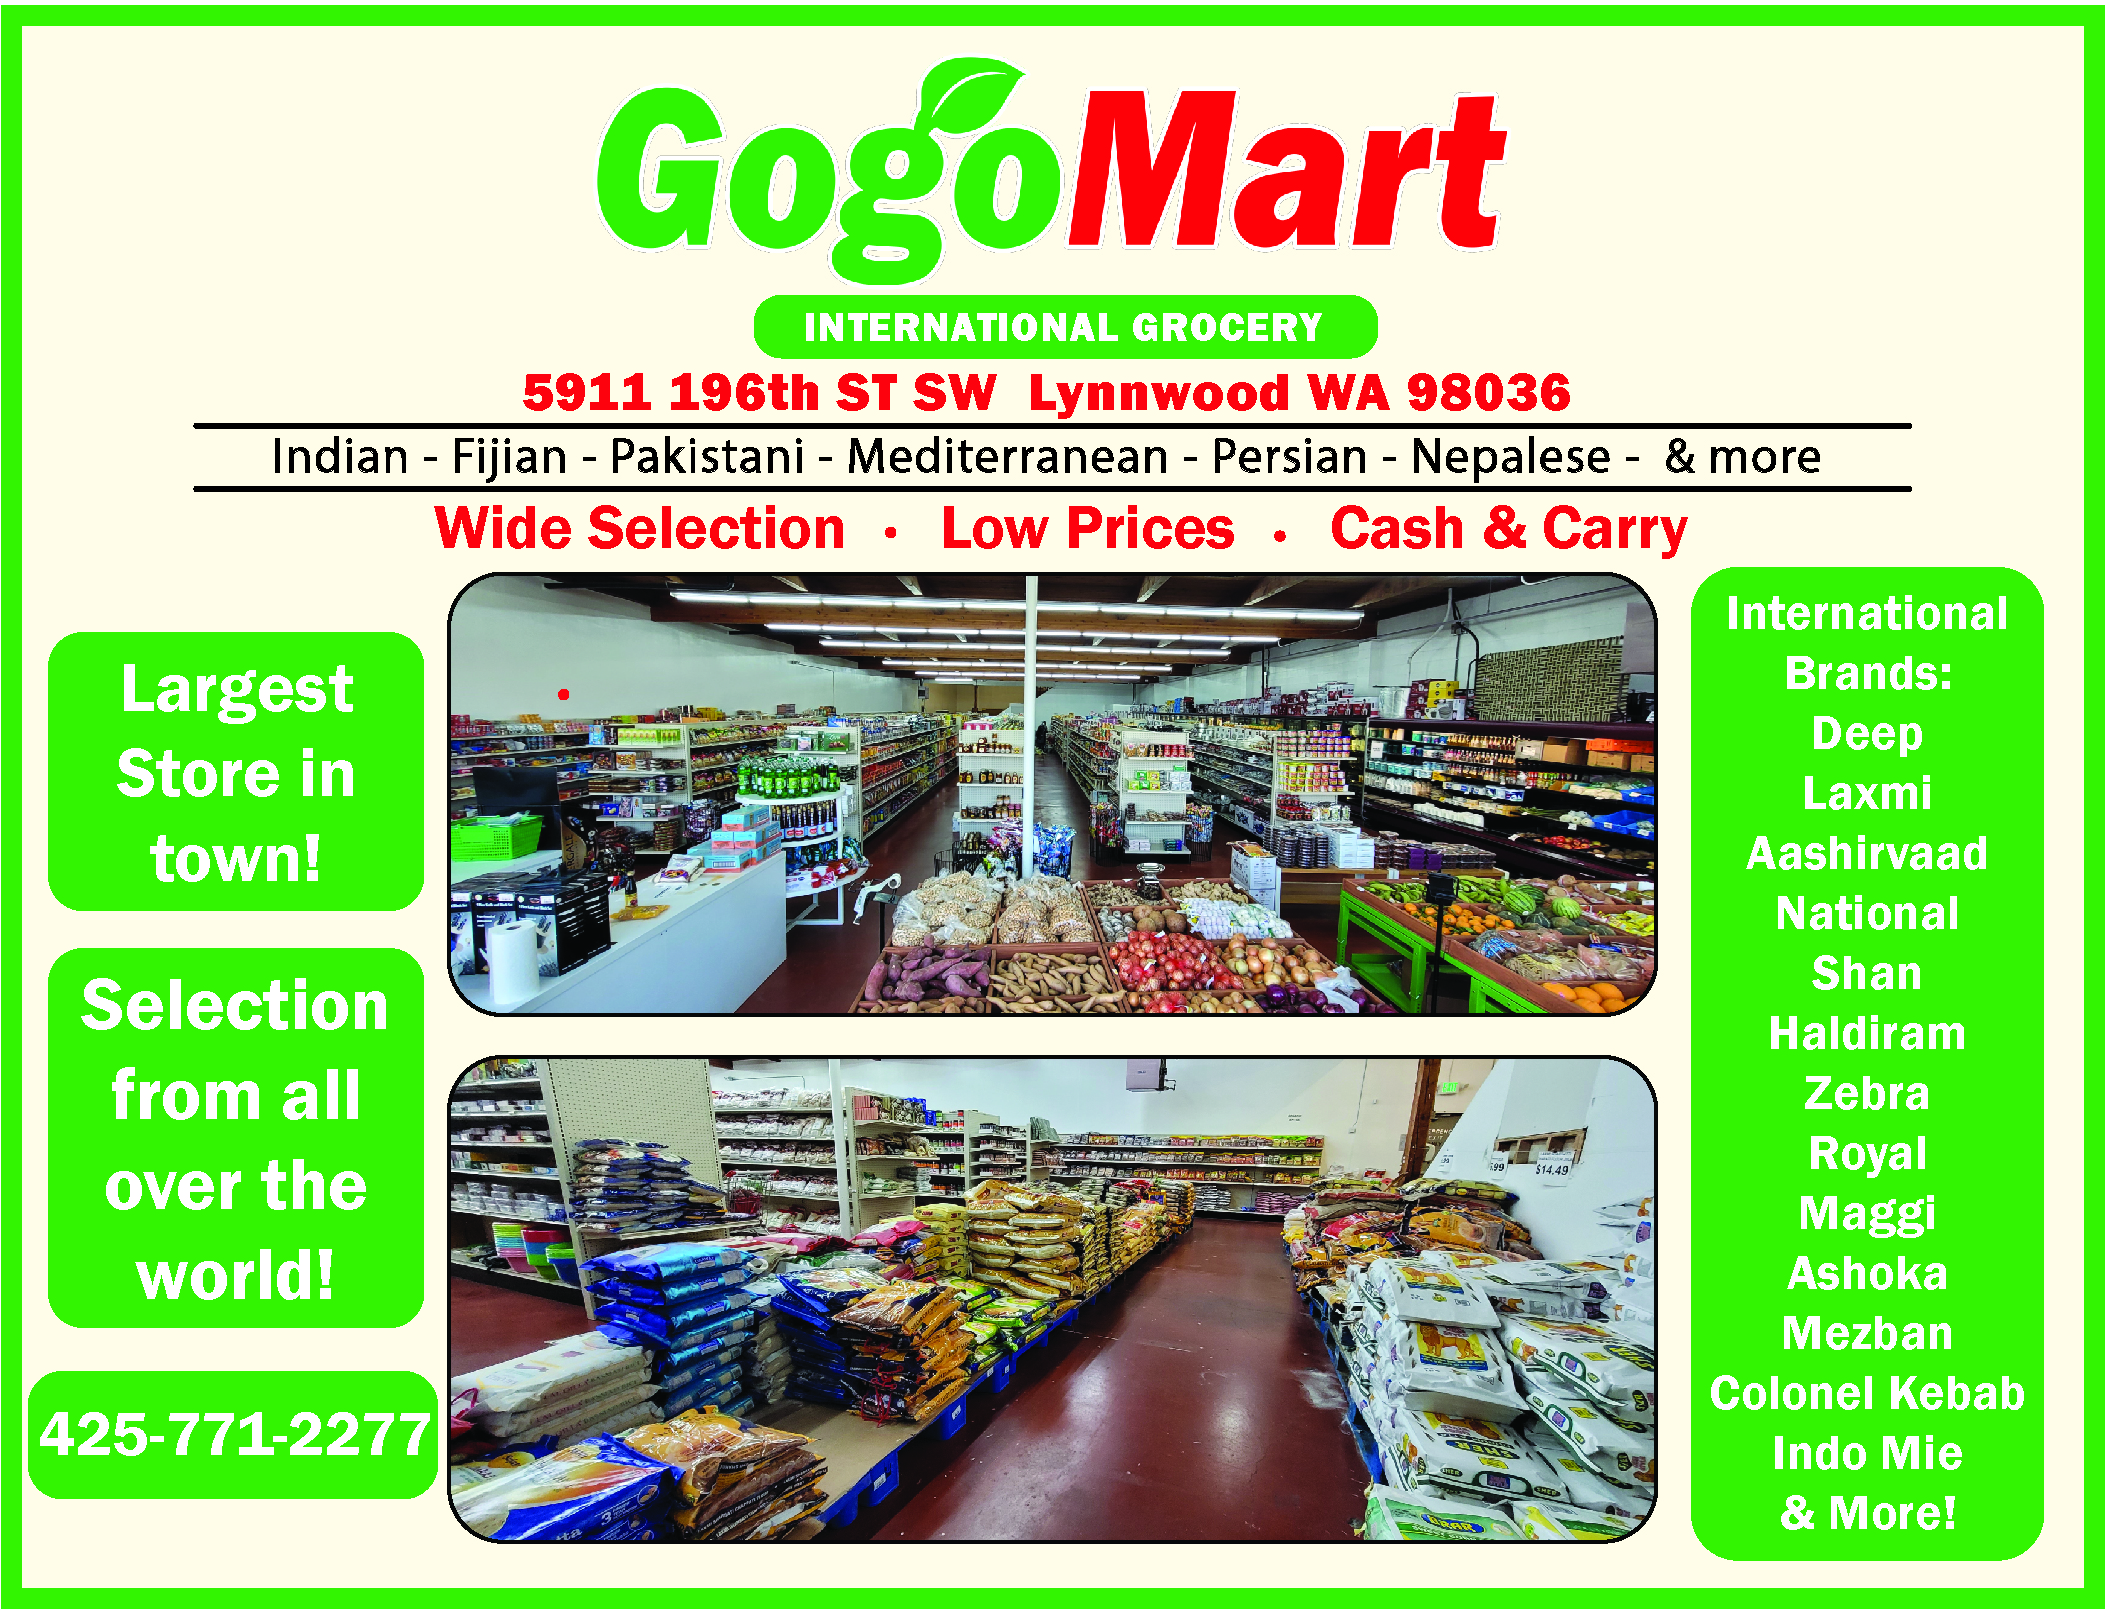 Gogo Mart Grocery International - Indian Grocery Stores